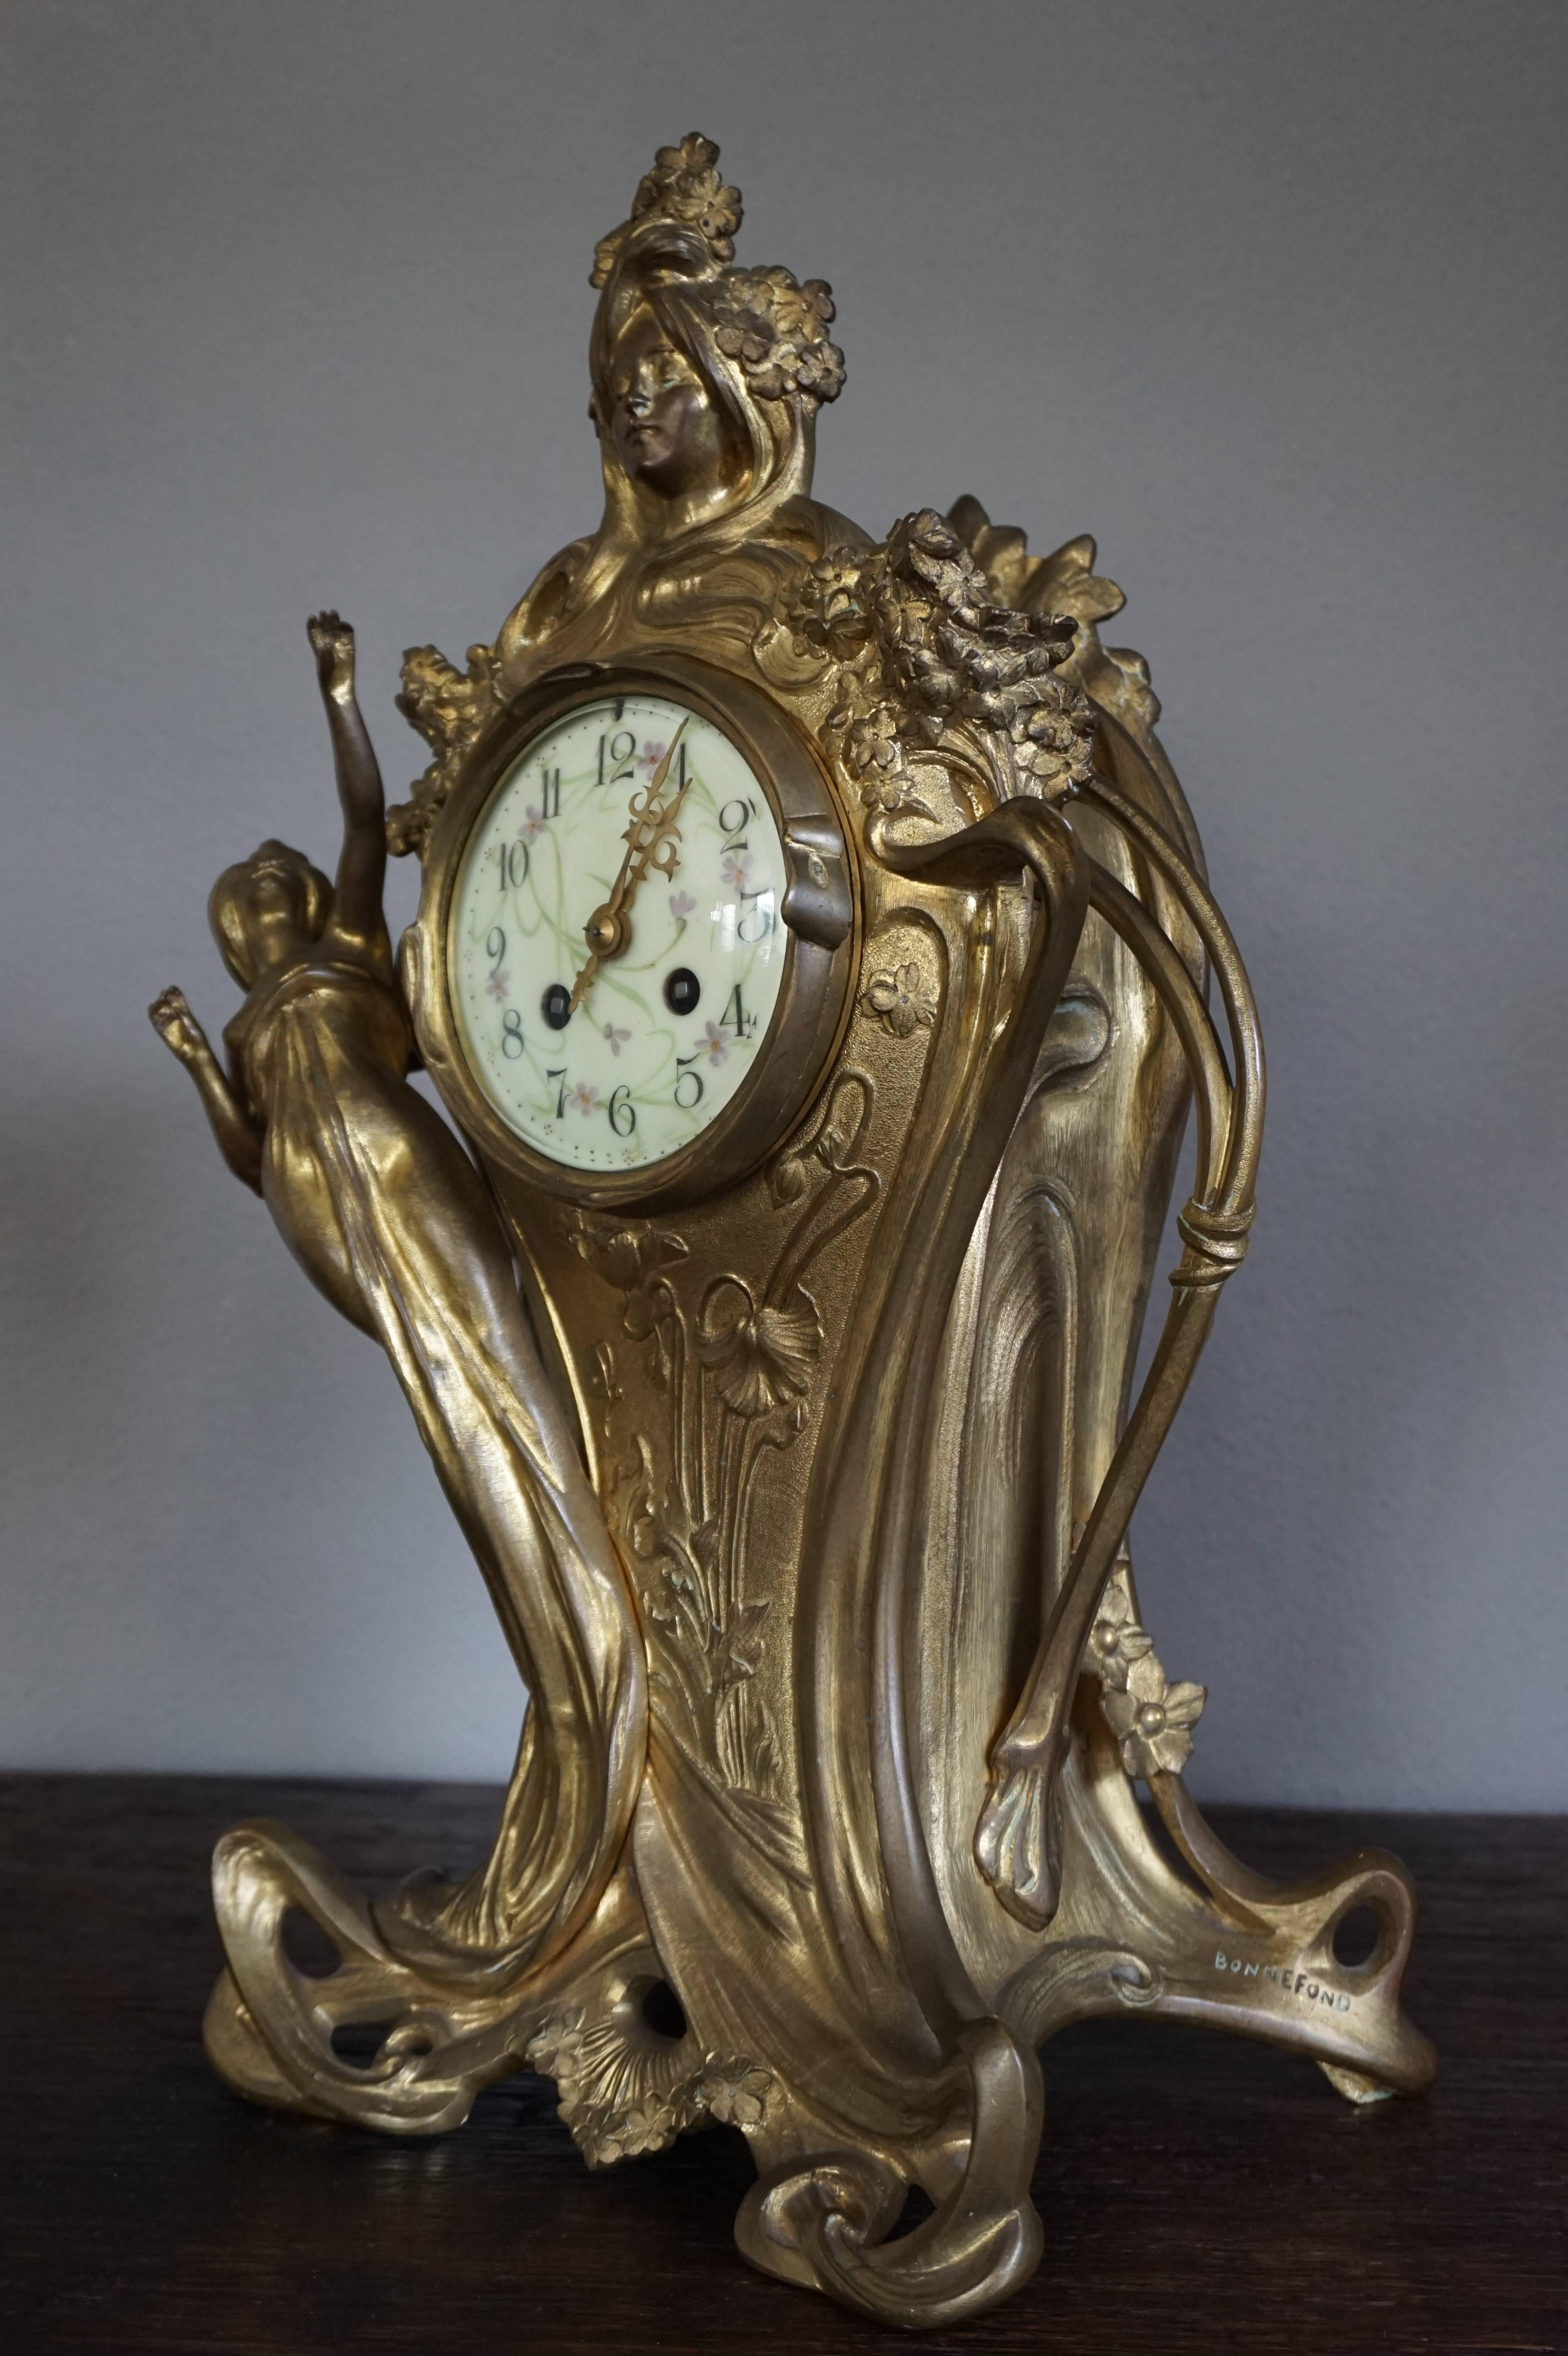 Large and impressive, Bonnefond signed clock garniture with top quality bronze lady sculptures.

This Art Nouveau clock garniture is in the wonderful style of the Nancy School (l'école Nancy). The vibrant lady on the left side of the pendulum